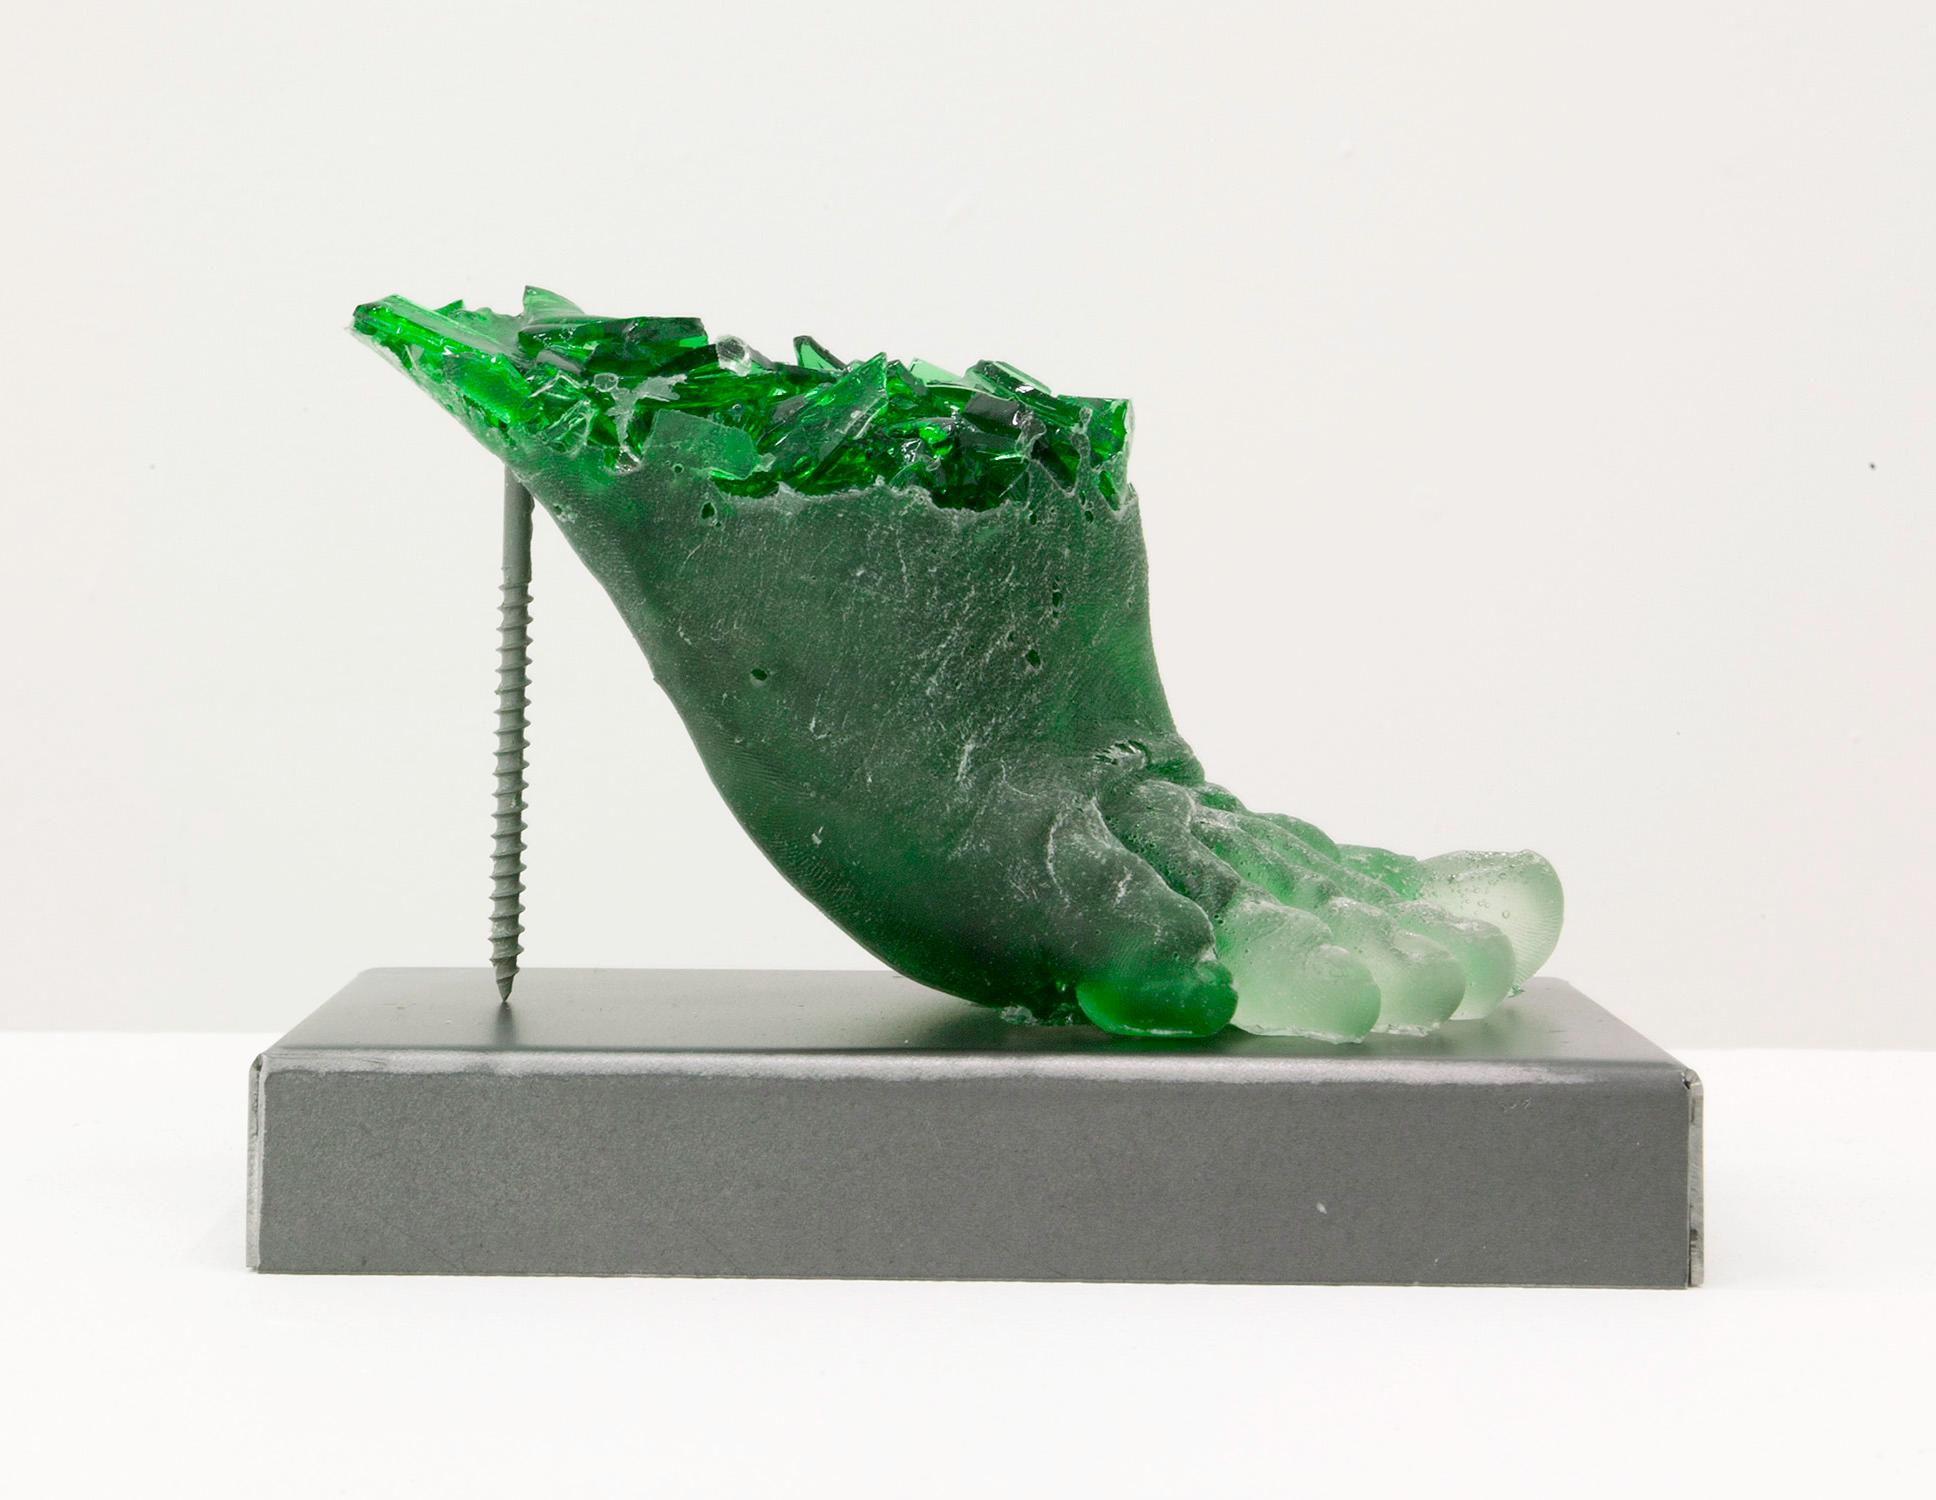 Rachel Owens, Footwear (Green Heel), 2015, Broken glass cast in resin with steel. Rachel Owens is known for her compelling works made with her signature process of casting broken shards of bottle glass. Here, she cast the glass in a mold made from